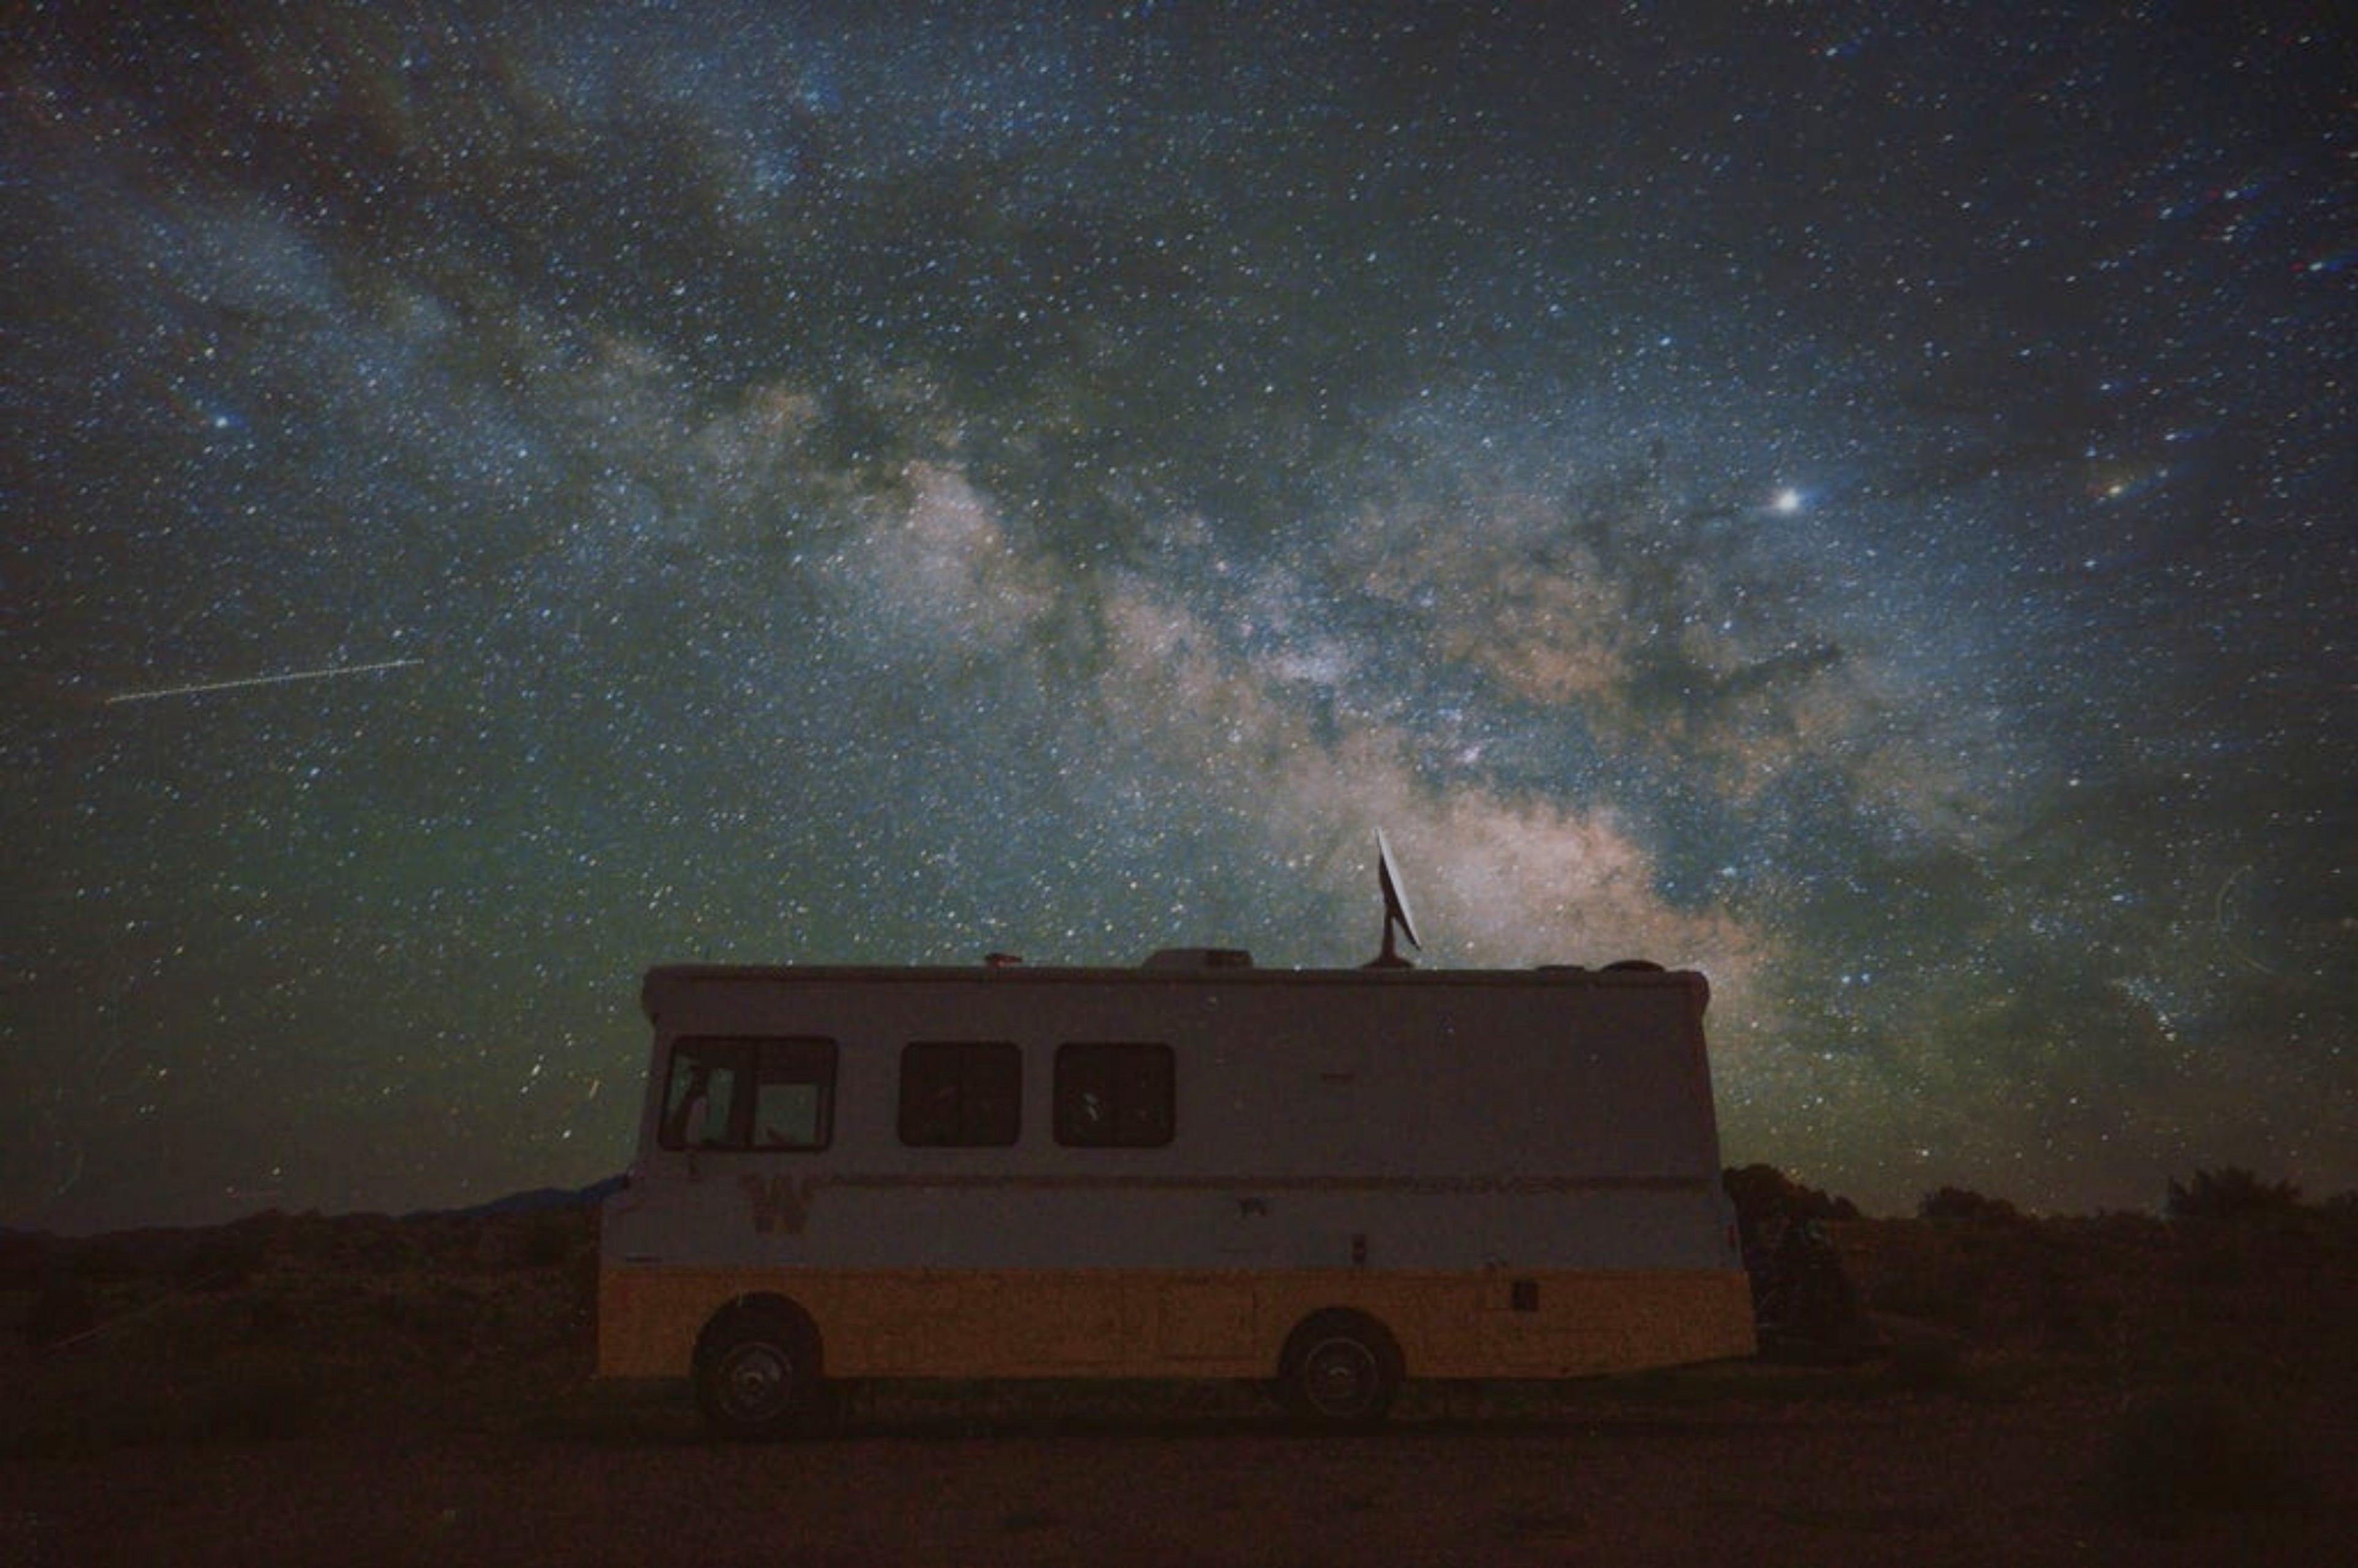 WordPress Founder Uses SpaceX Starlink Internet In An RV, Looks Forward To Service Mobility